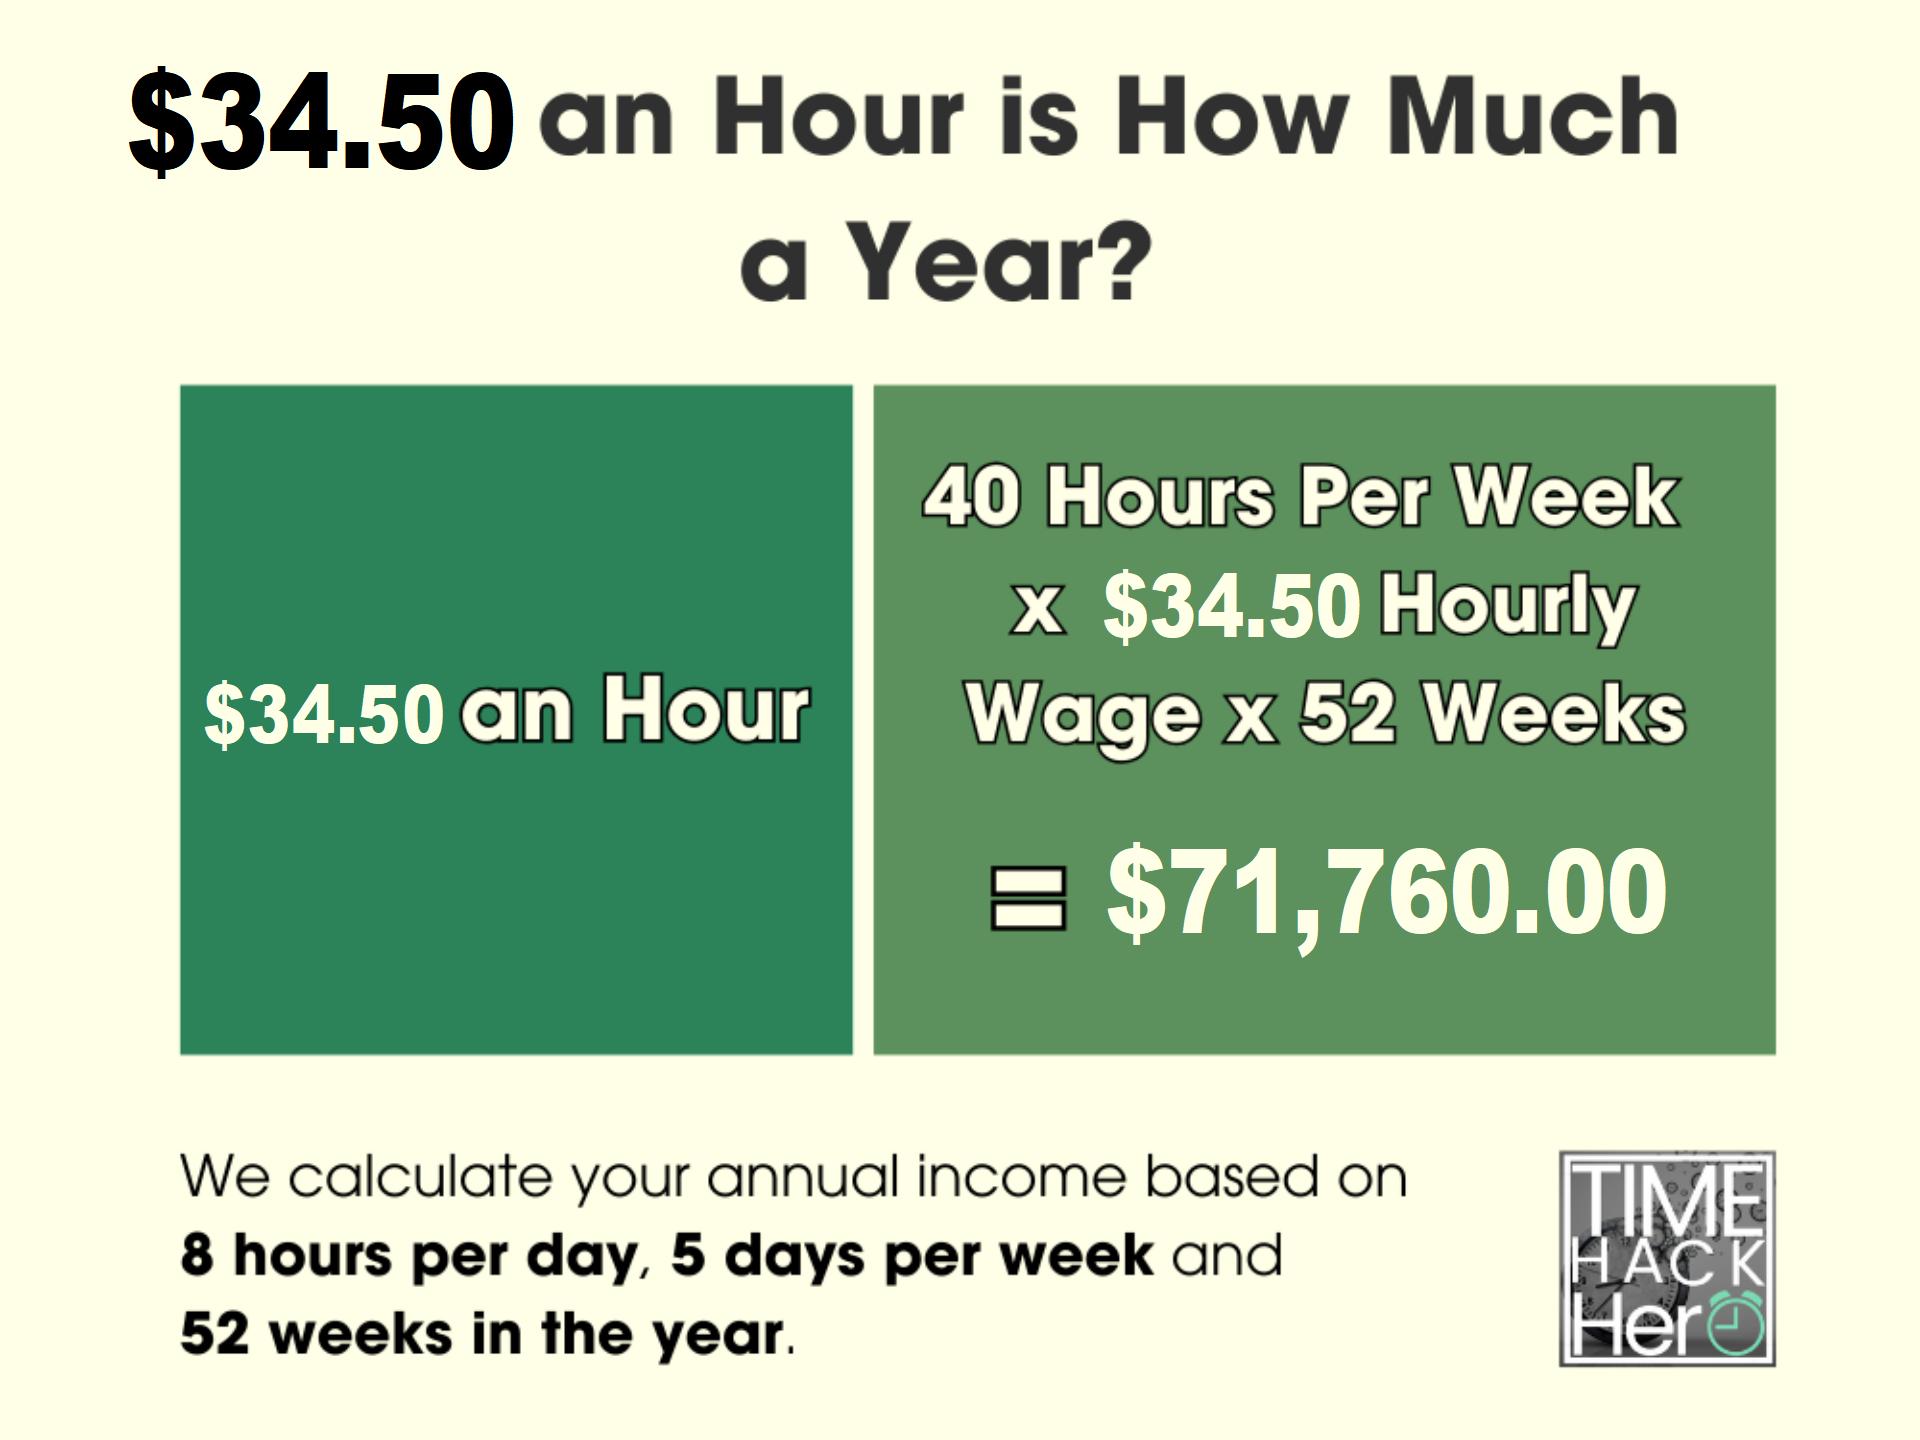 $34.50 an Hour is How Much a Year